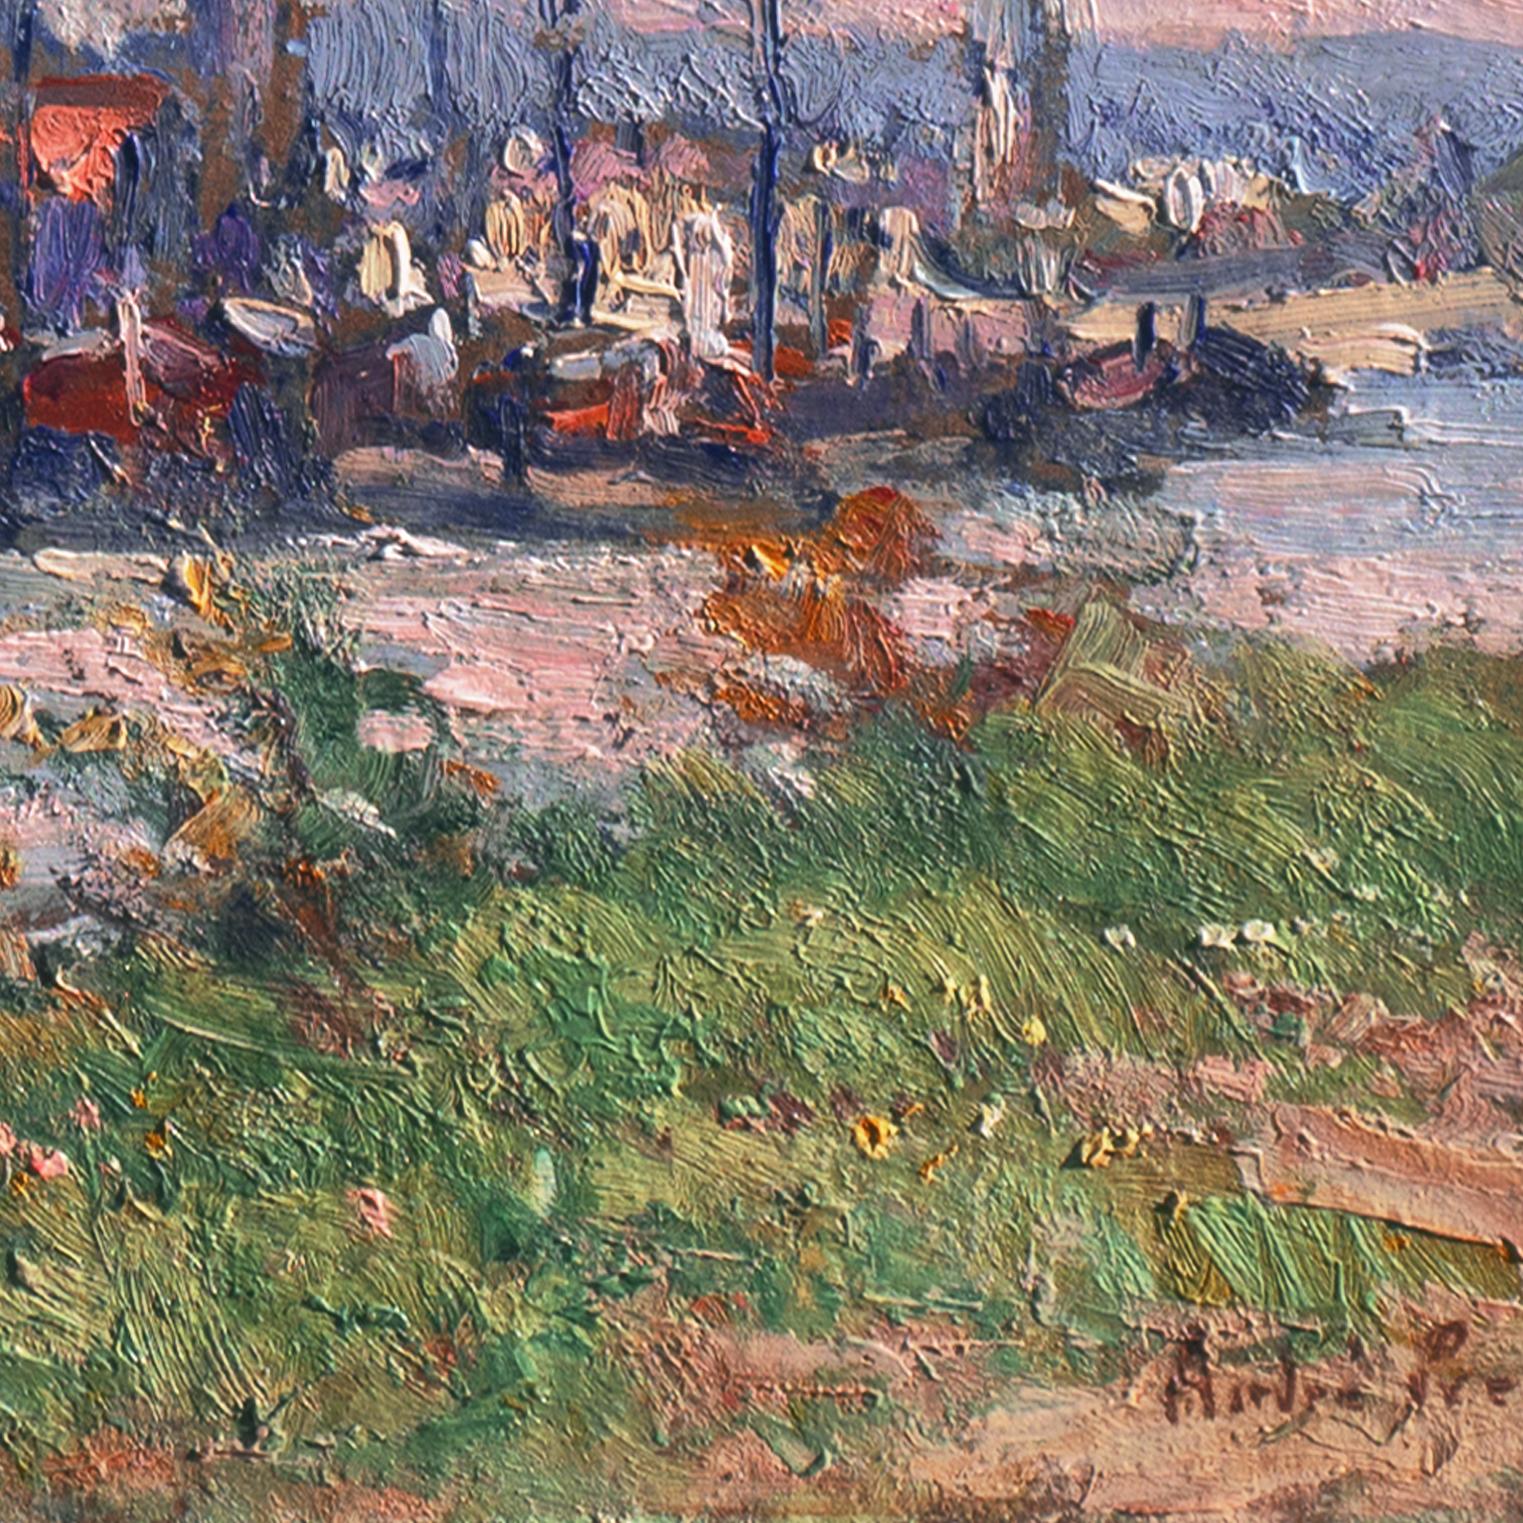 Signed lower right, 'André Prévot-Valéri' (French, 1890-1959) and painted circa 1920.

André Prévot-Valéri was the son of the landscape painter, August Prévot-Valéri (1857-1930), and grew up in the studio that they continued to share until 1930.